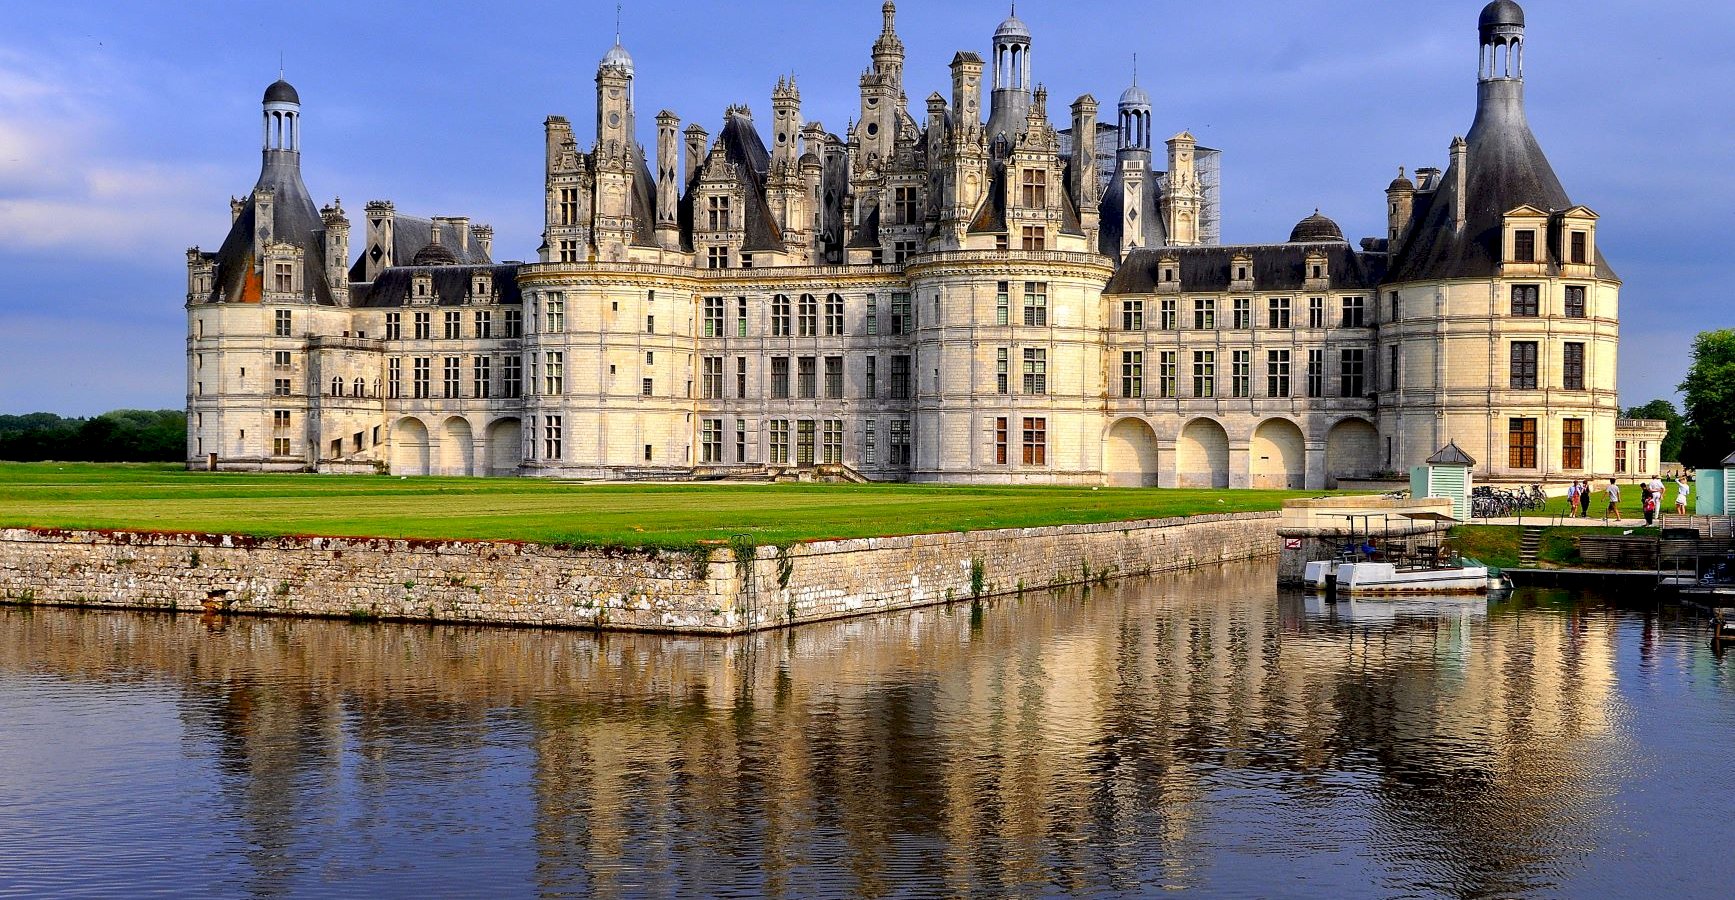 Ophorus Tours - A Private Loire Valley Day Trip from Tours to Chenonceau & Chambord Castles